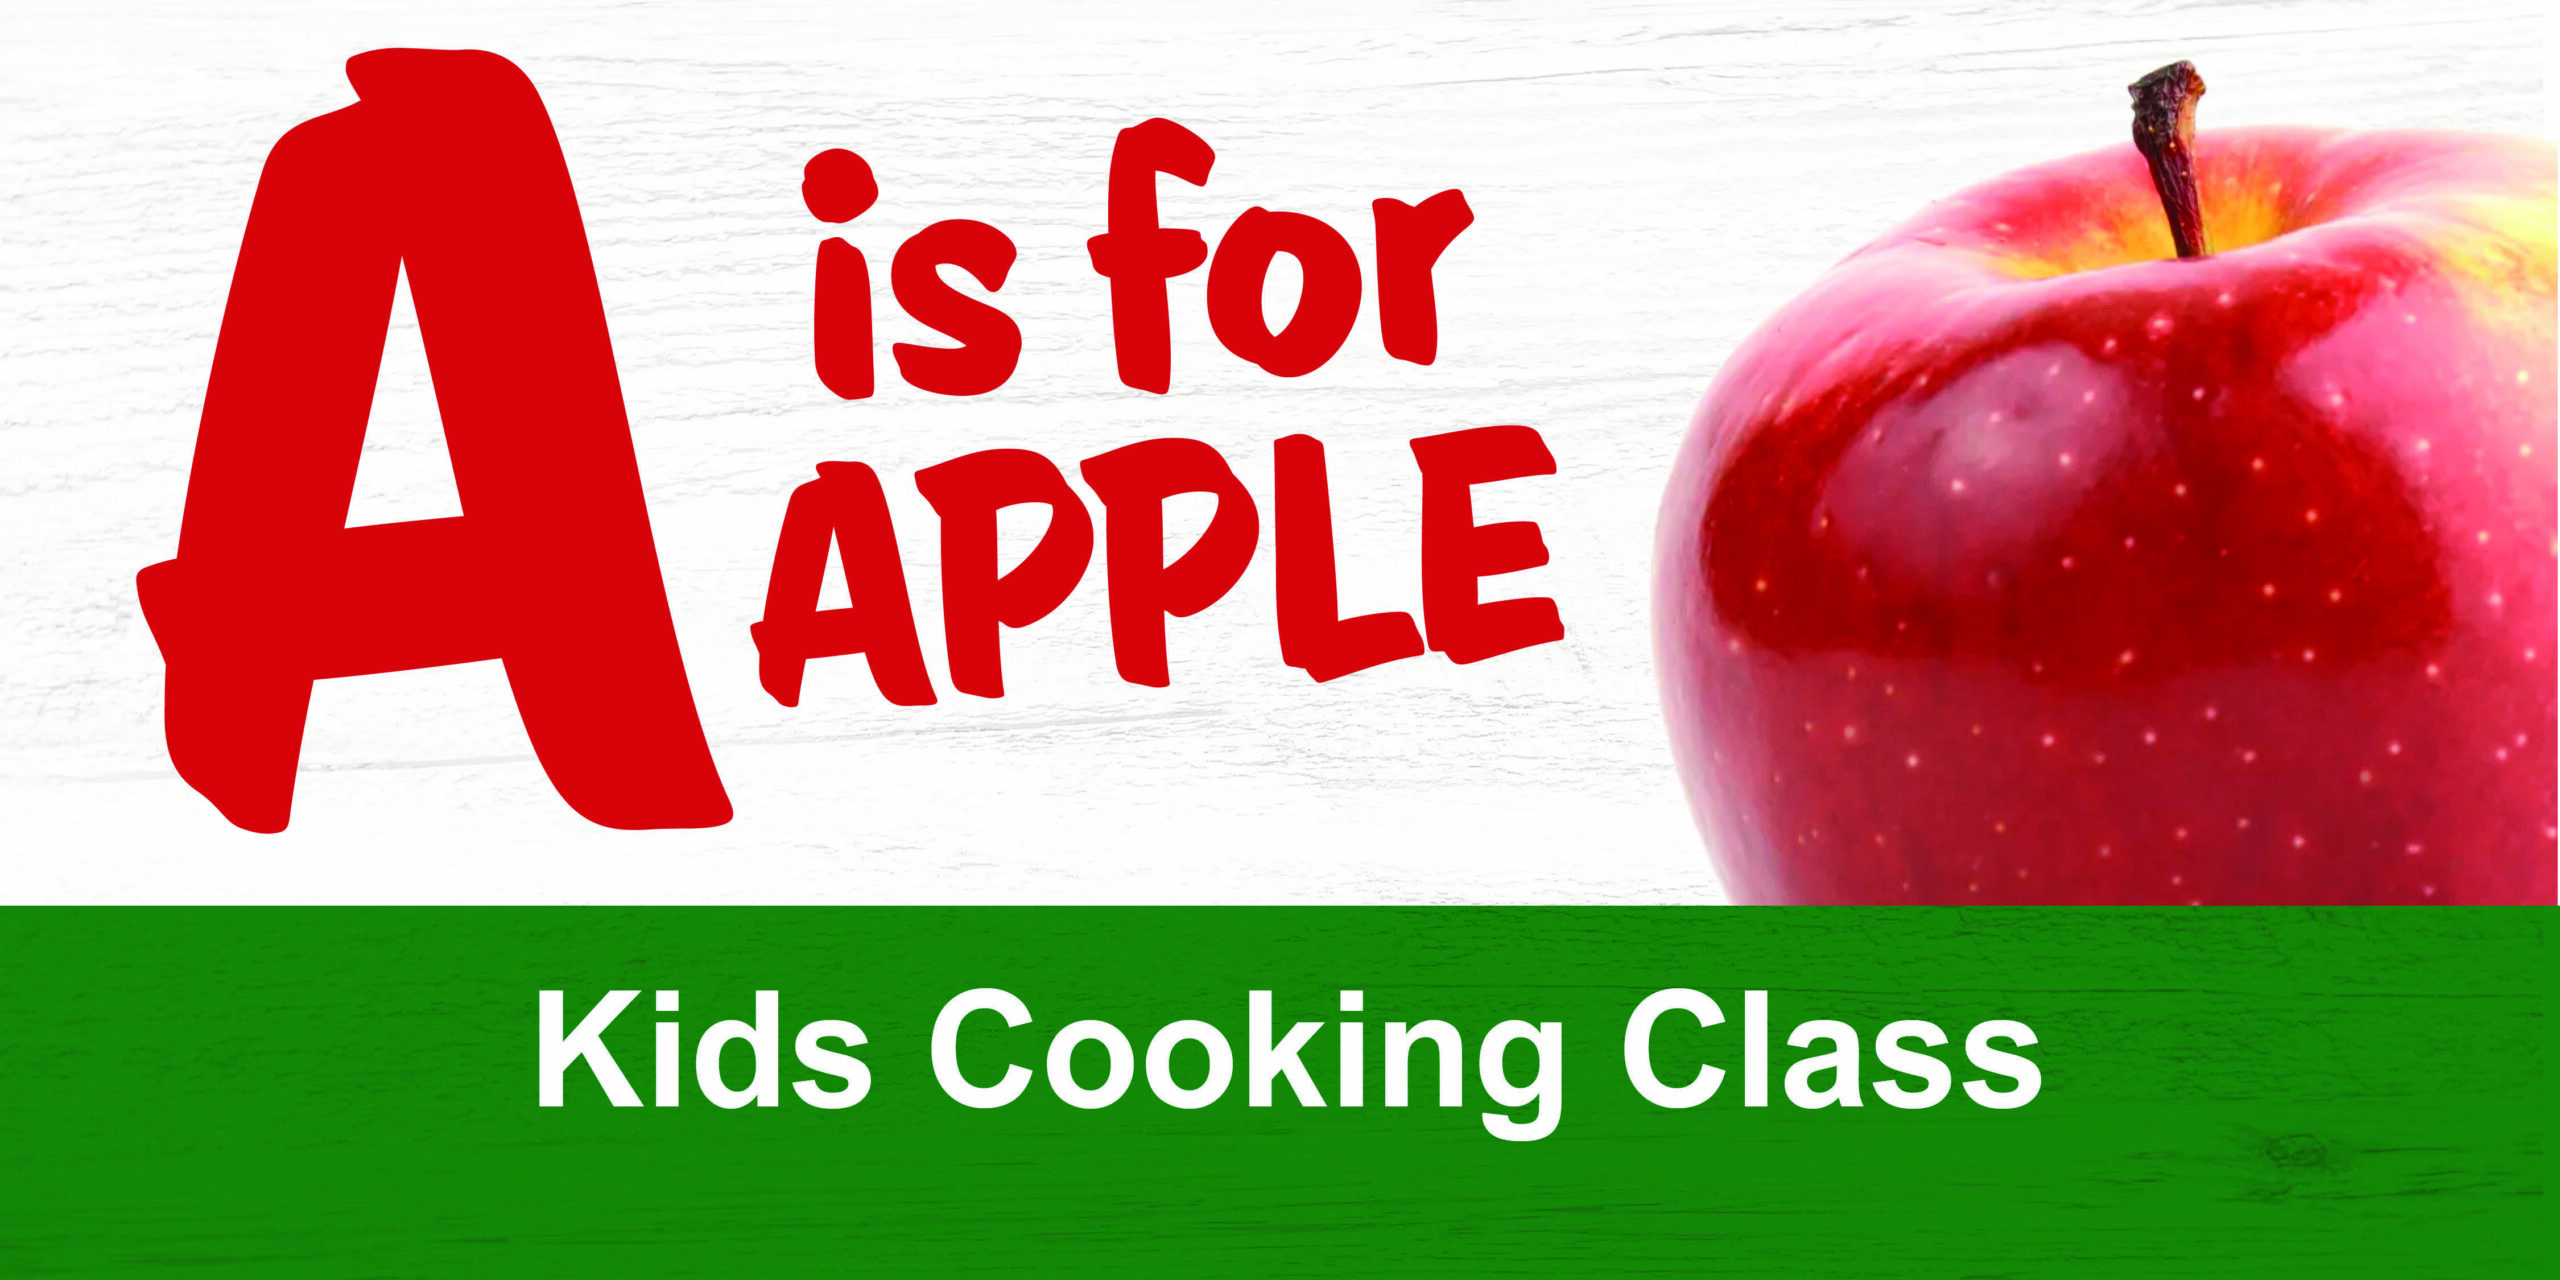 “A” is for Apple Culinary Class for Kids